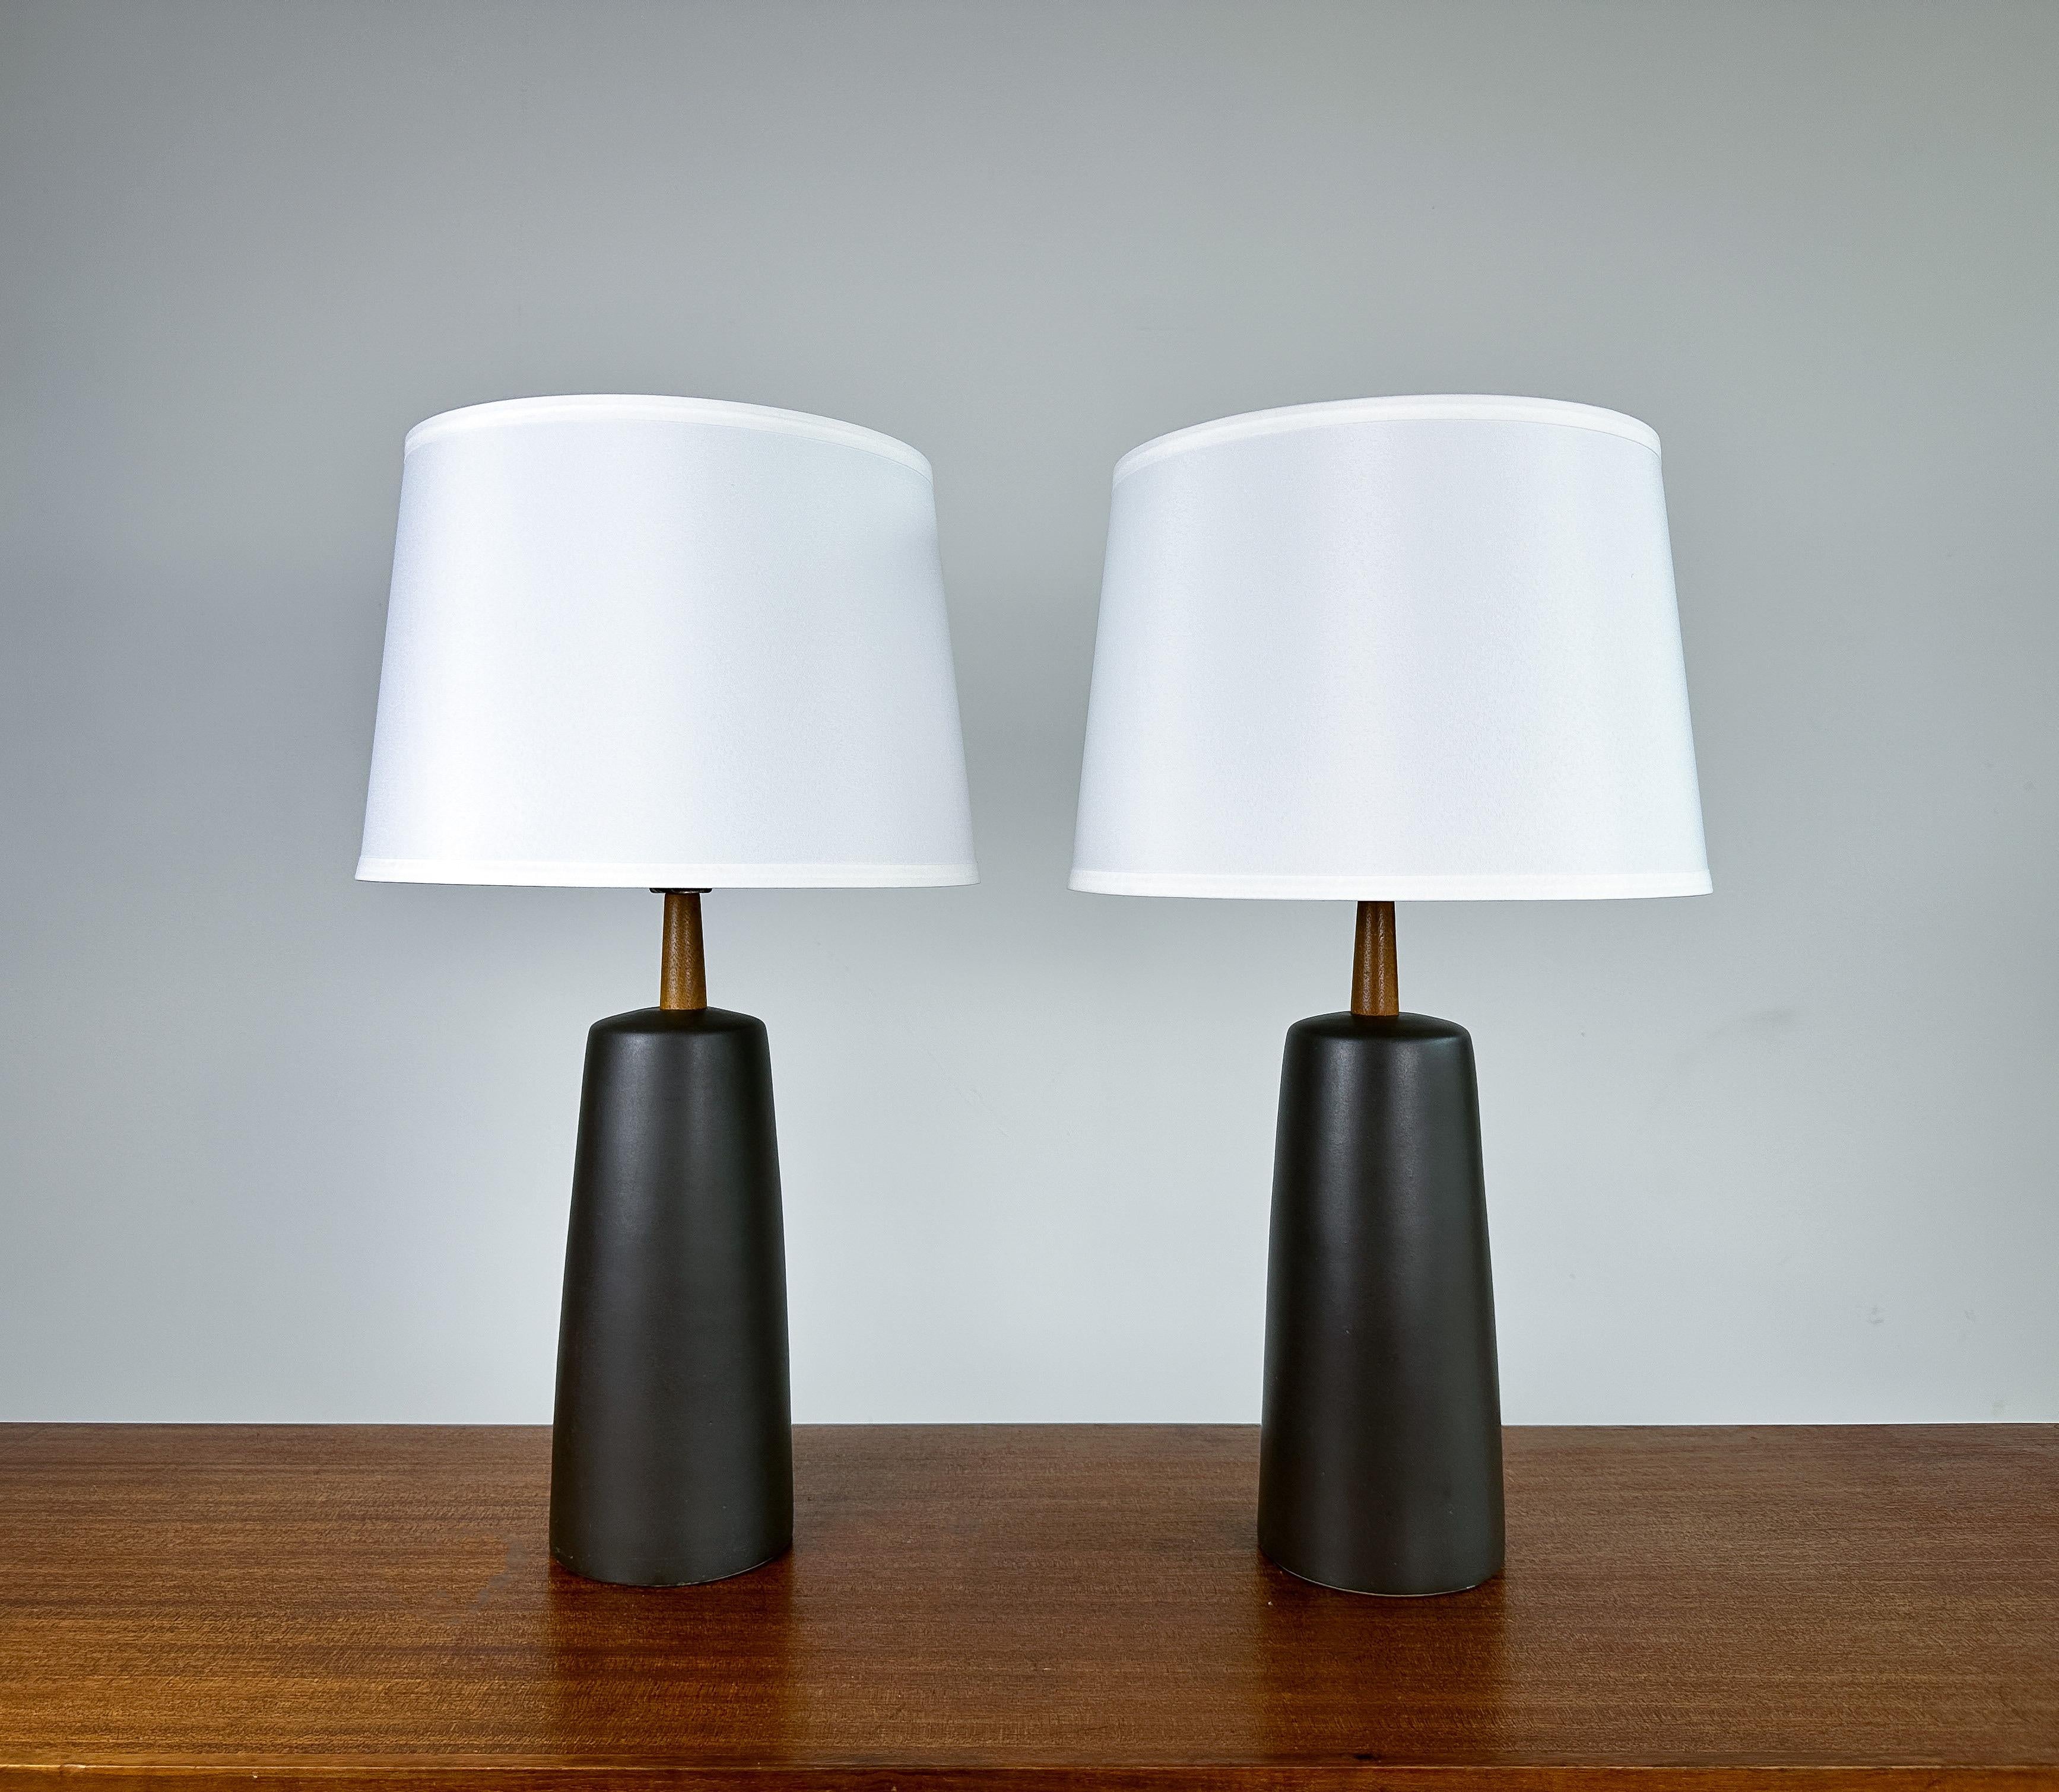 Offered is a fantastic pair of table lamps by renowned duo Jane and Gordon Martz for Marshall Studios, circa 1960s.

Featuring a lovely charcoal glaze paired with the signature solid walnut neck and finial. These lamps have such a wonderful presence